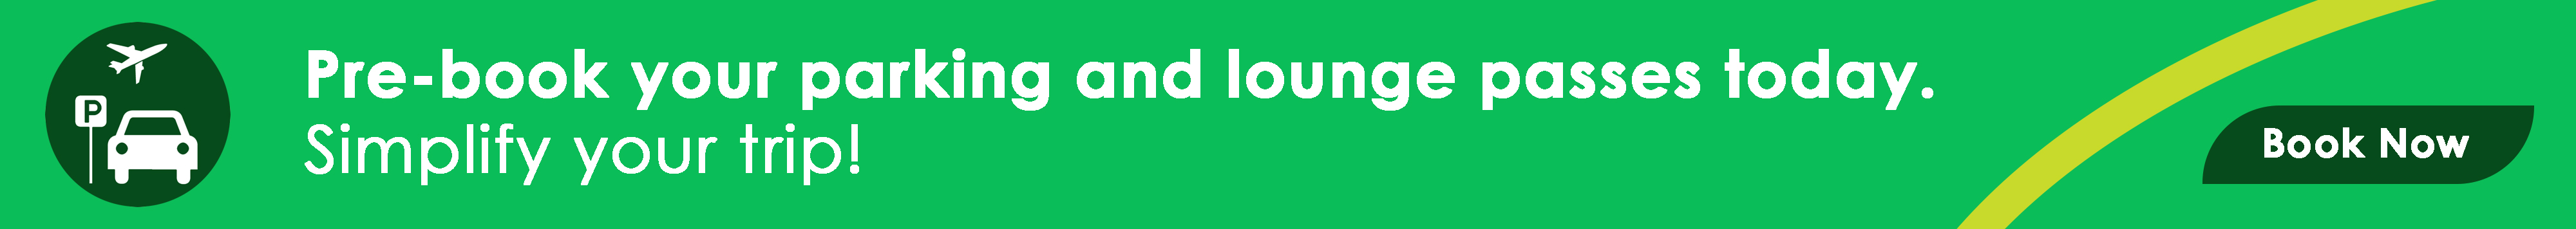 Pre-book your parking and lounge passes today.